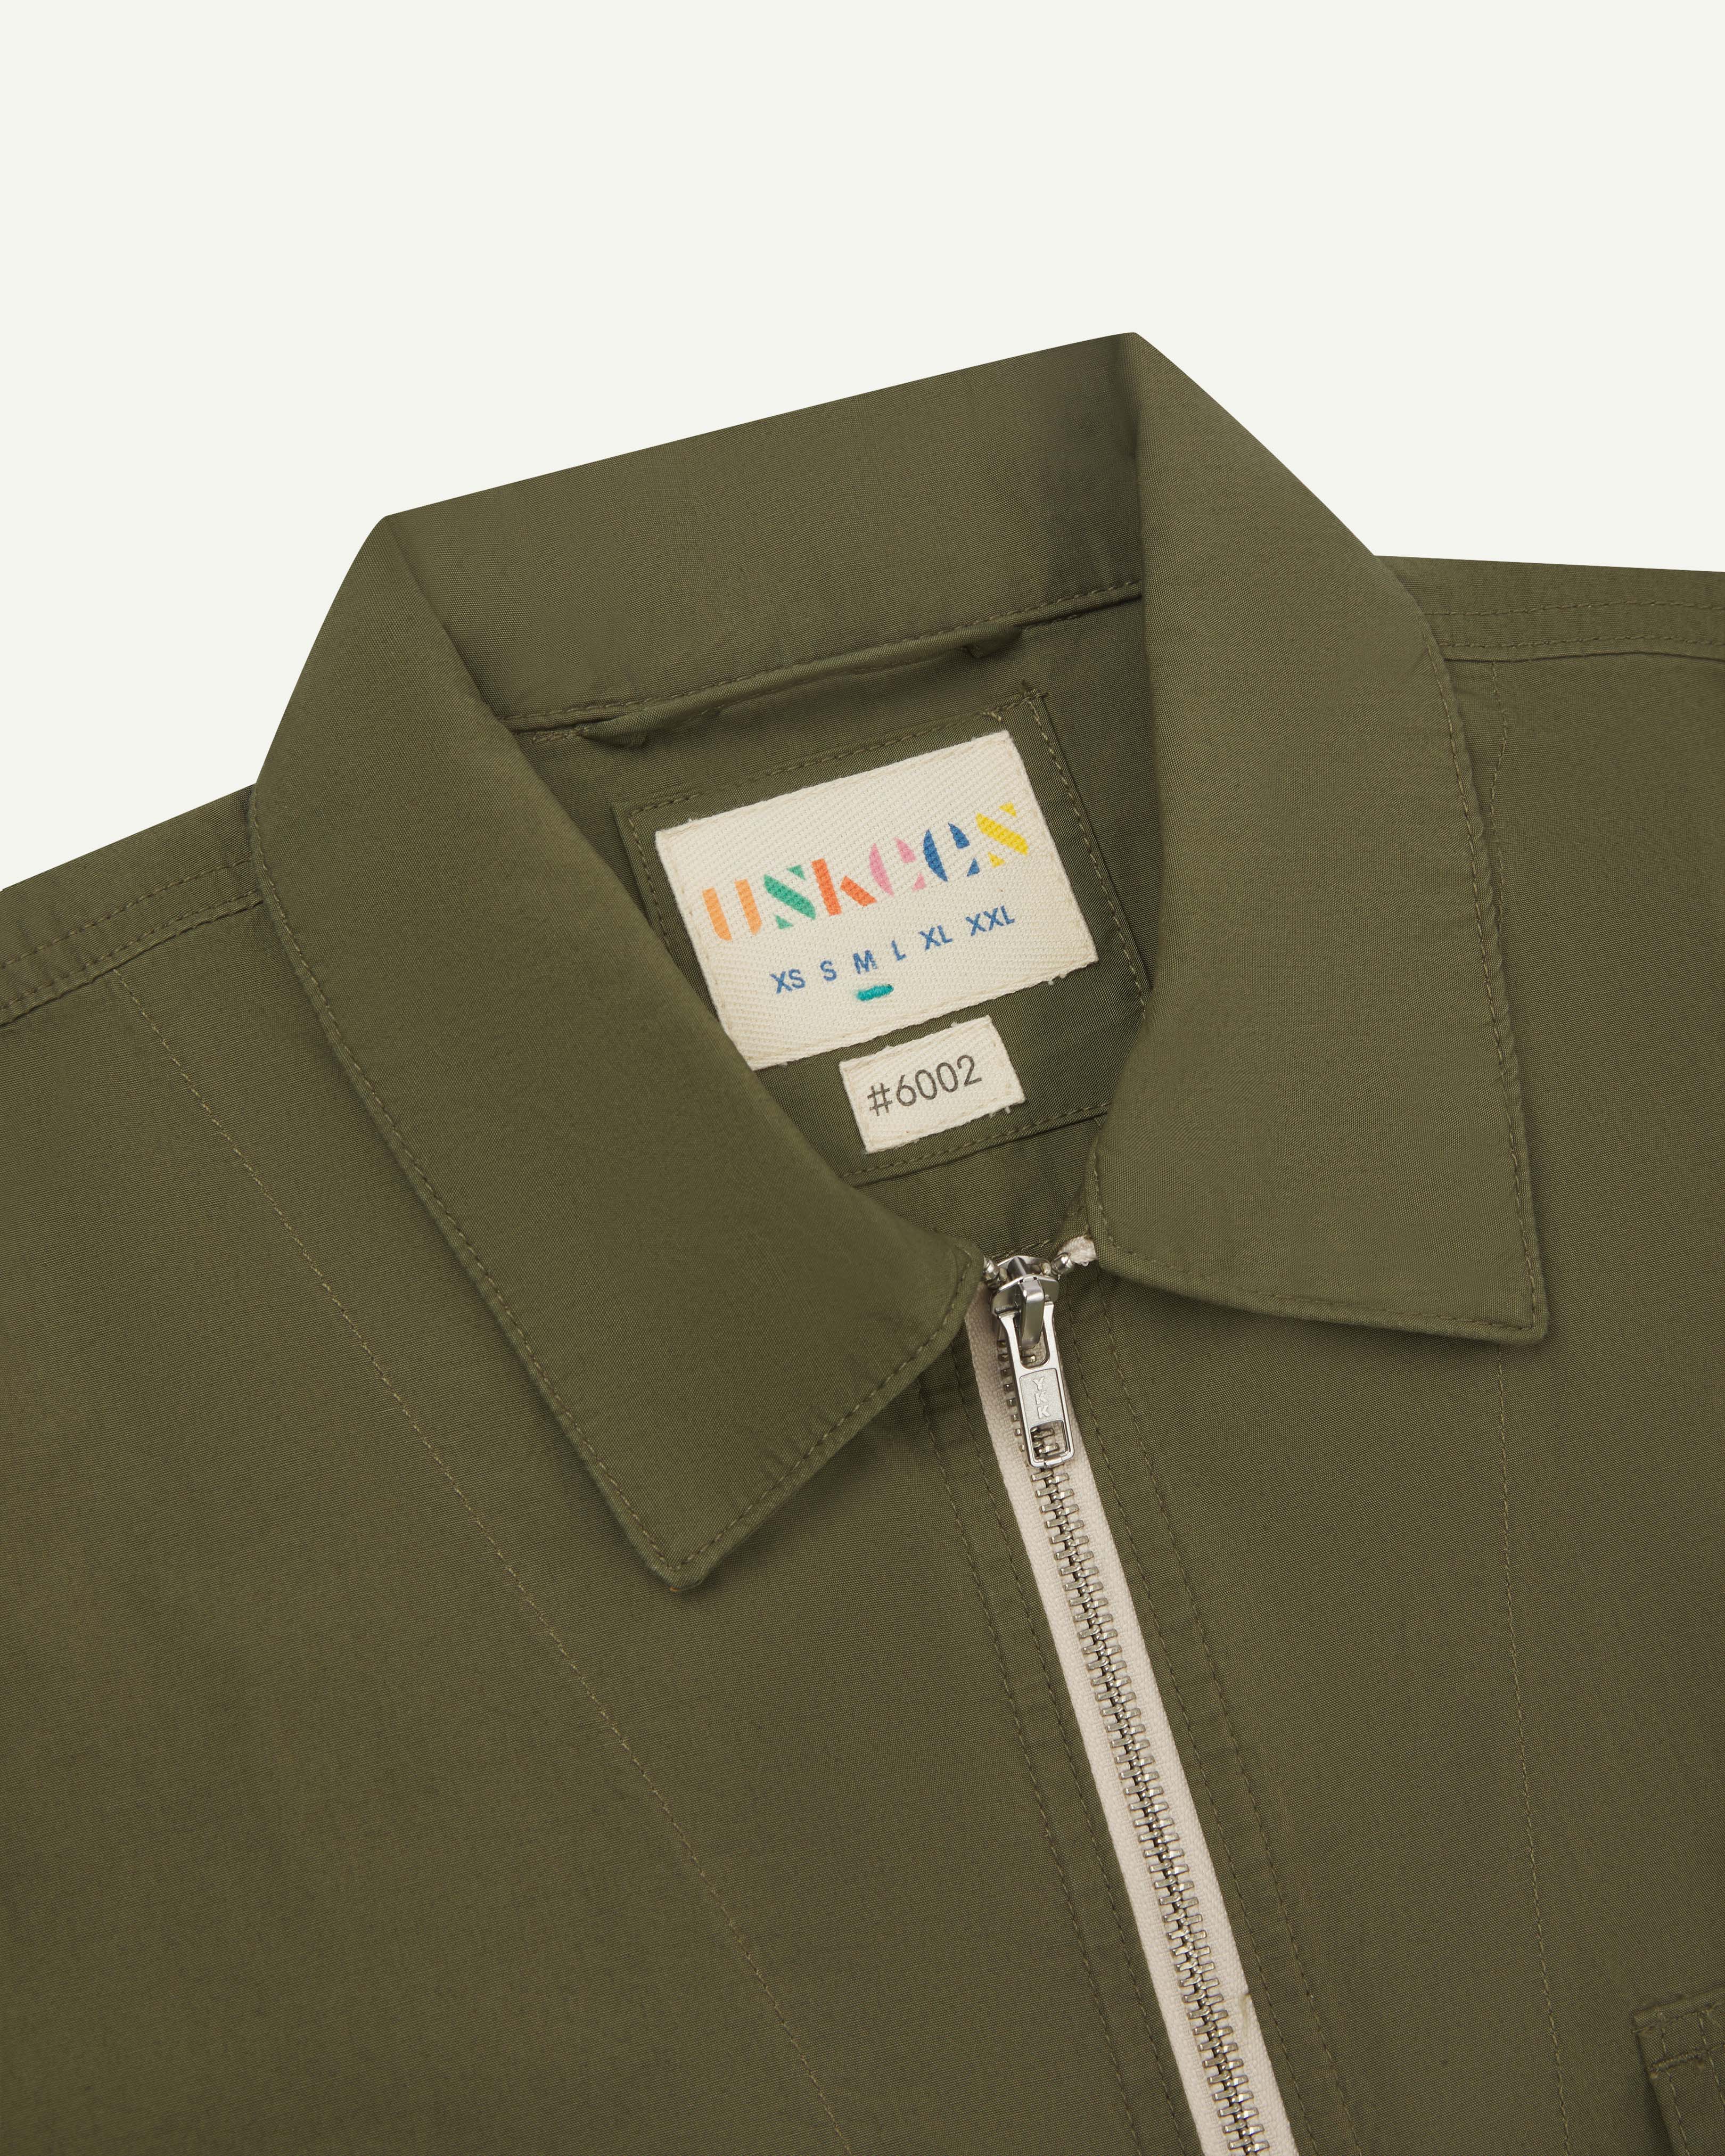 Close-up shot of uskees zip front lightweight men's jacket in olive green showing the contrast front zip and brand/size label.